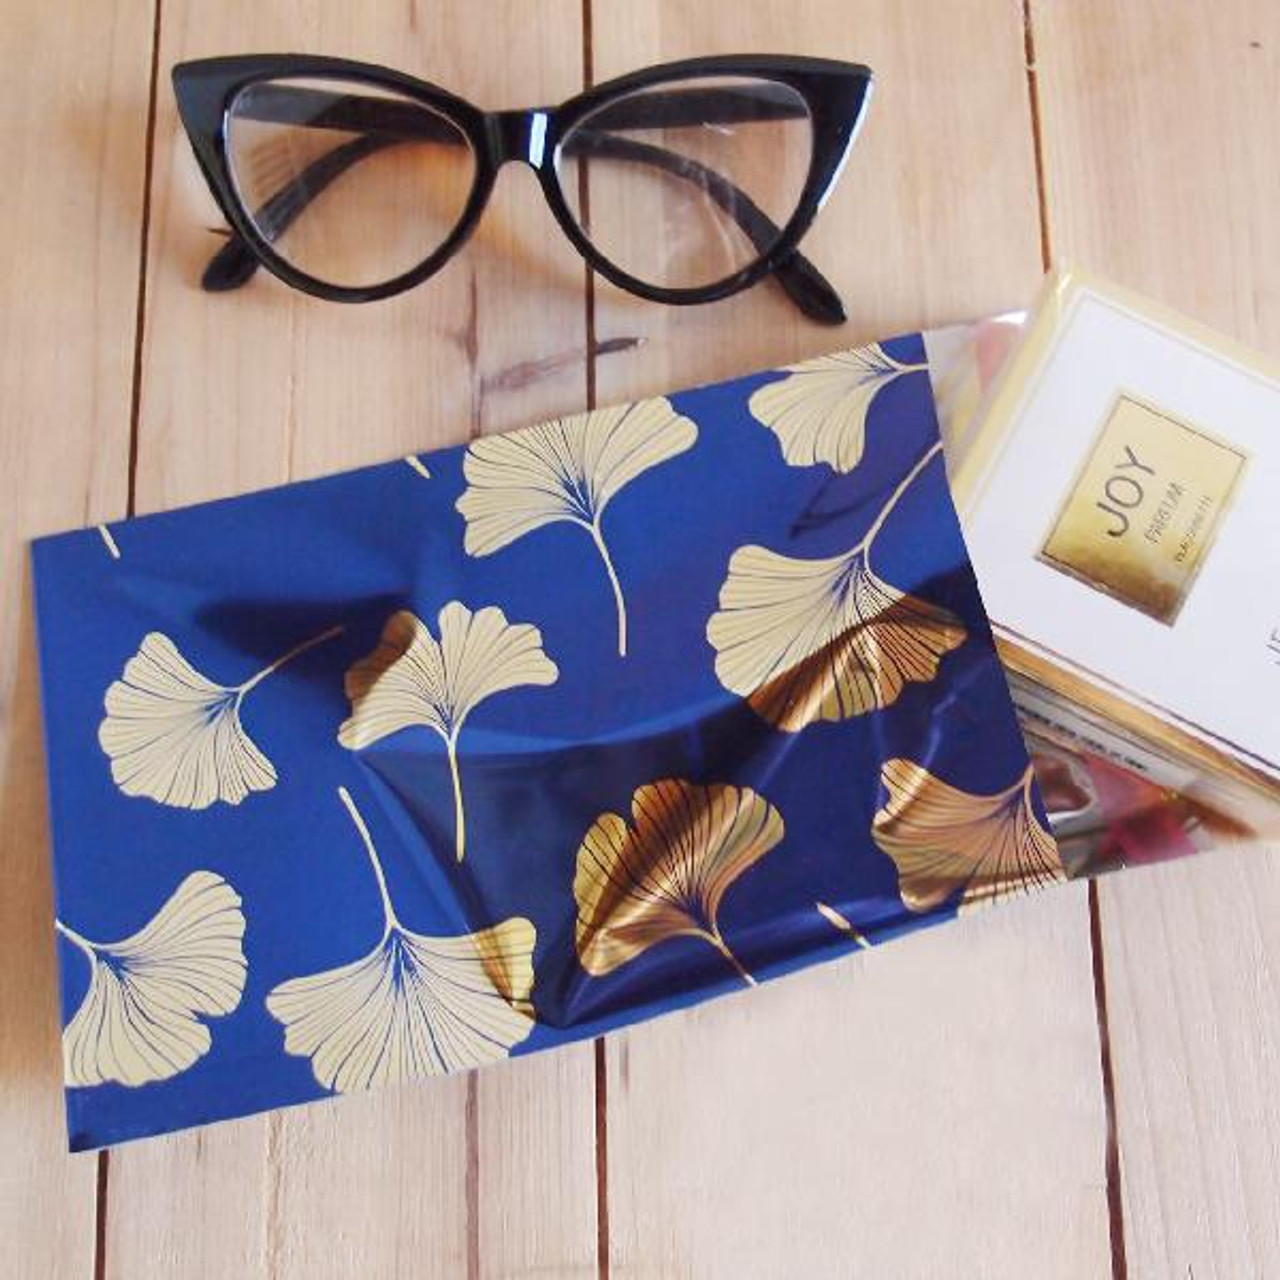 Adhesive Merchandise Bags 4 3/4" x 7 1/4" Gold Gingko on Blue